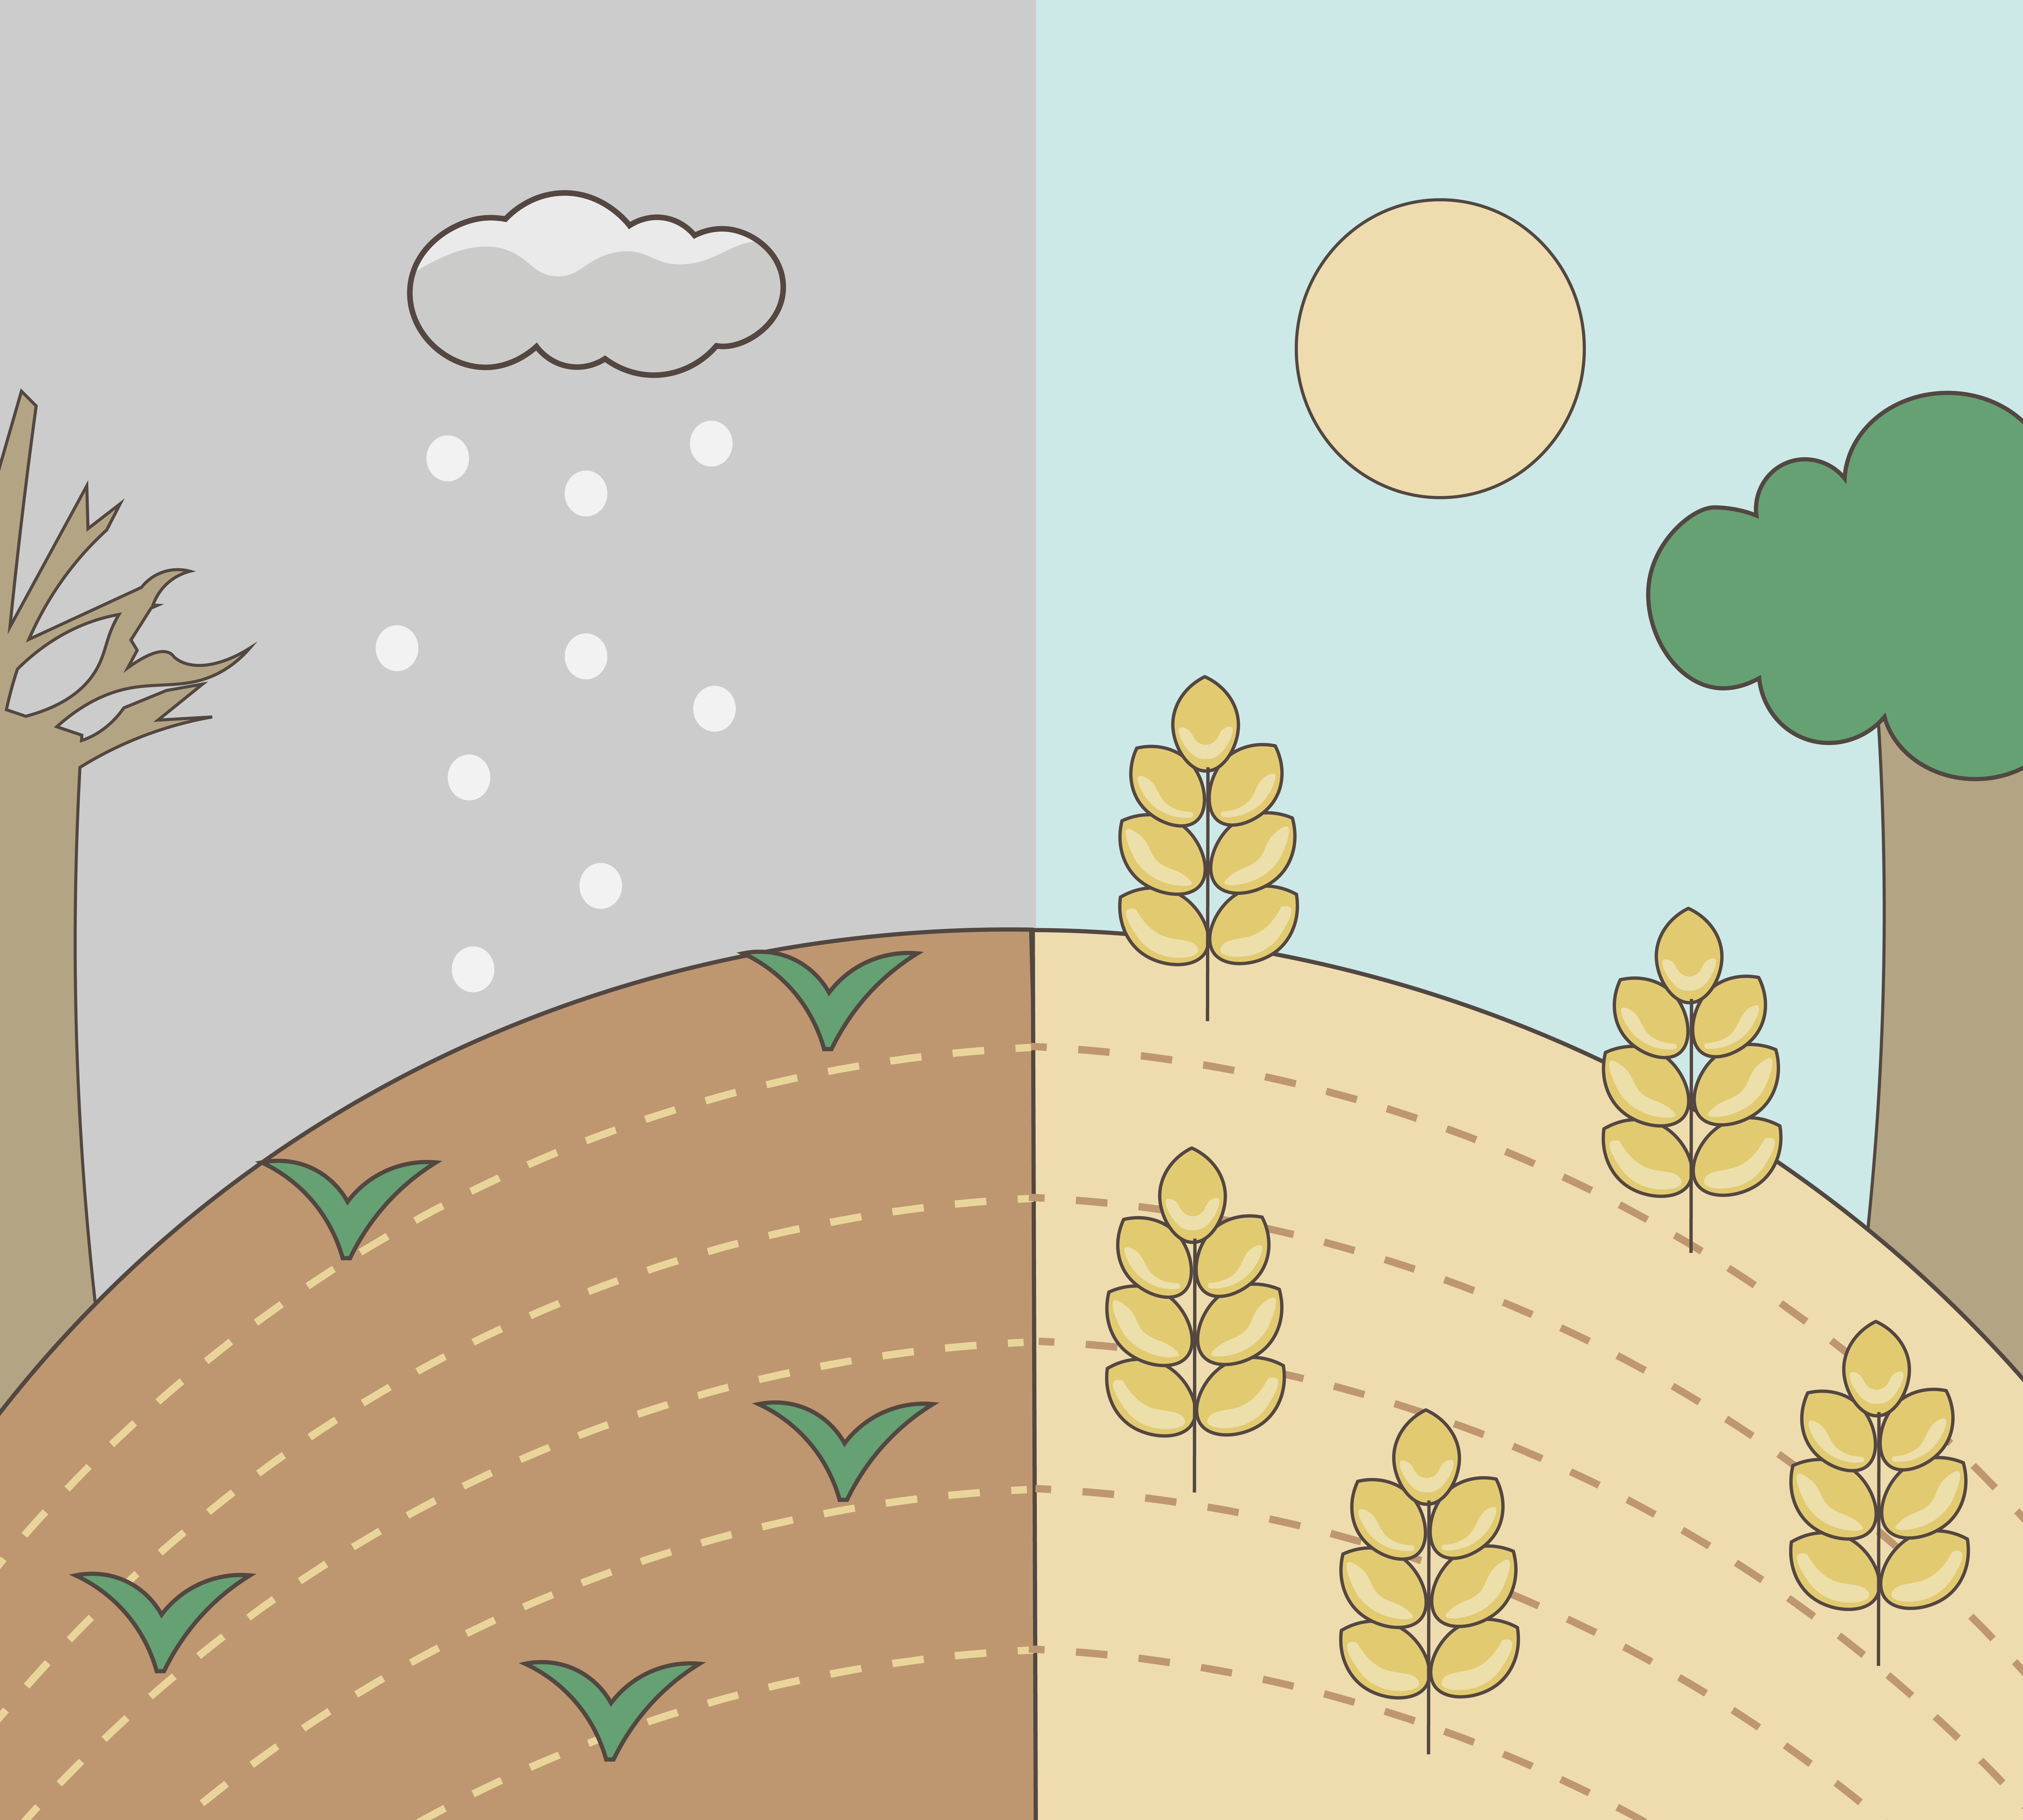 illustration depicting winter and spring barley growing conditions